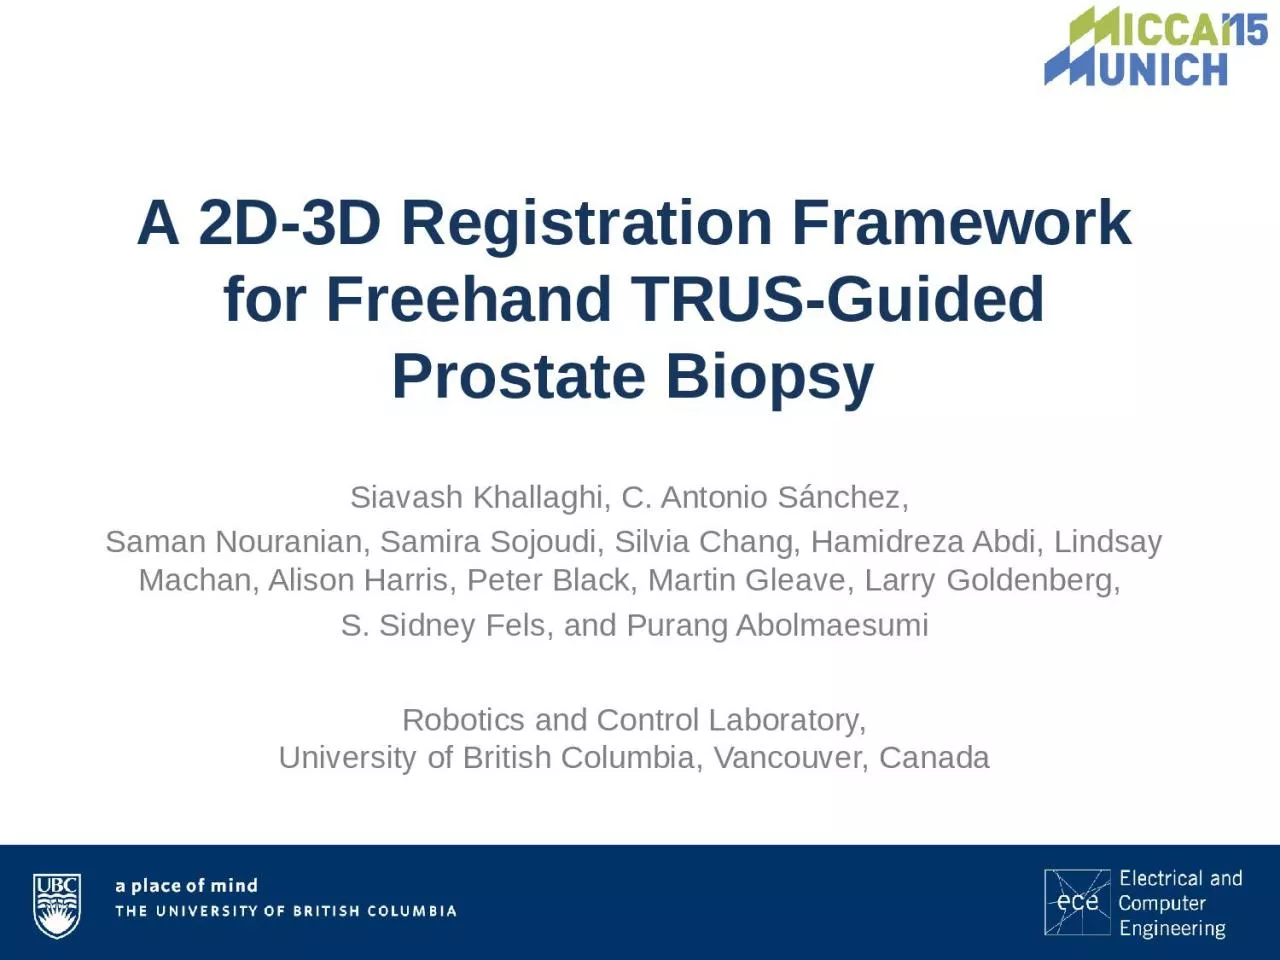 A 2D-3D Registration Framework for Freehand TRUS-Guided Prostate Biopsy